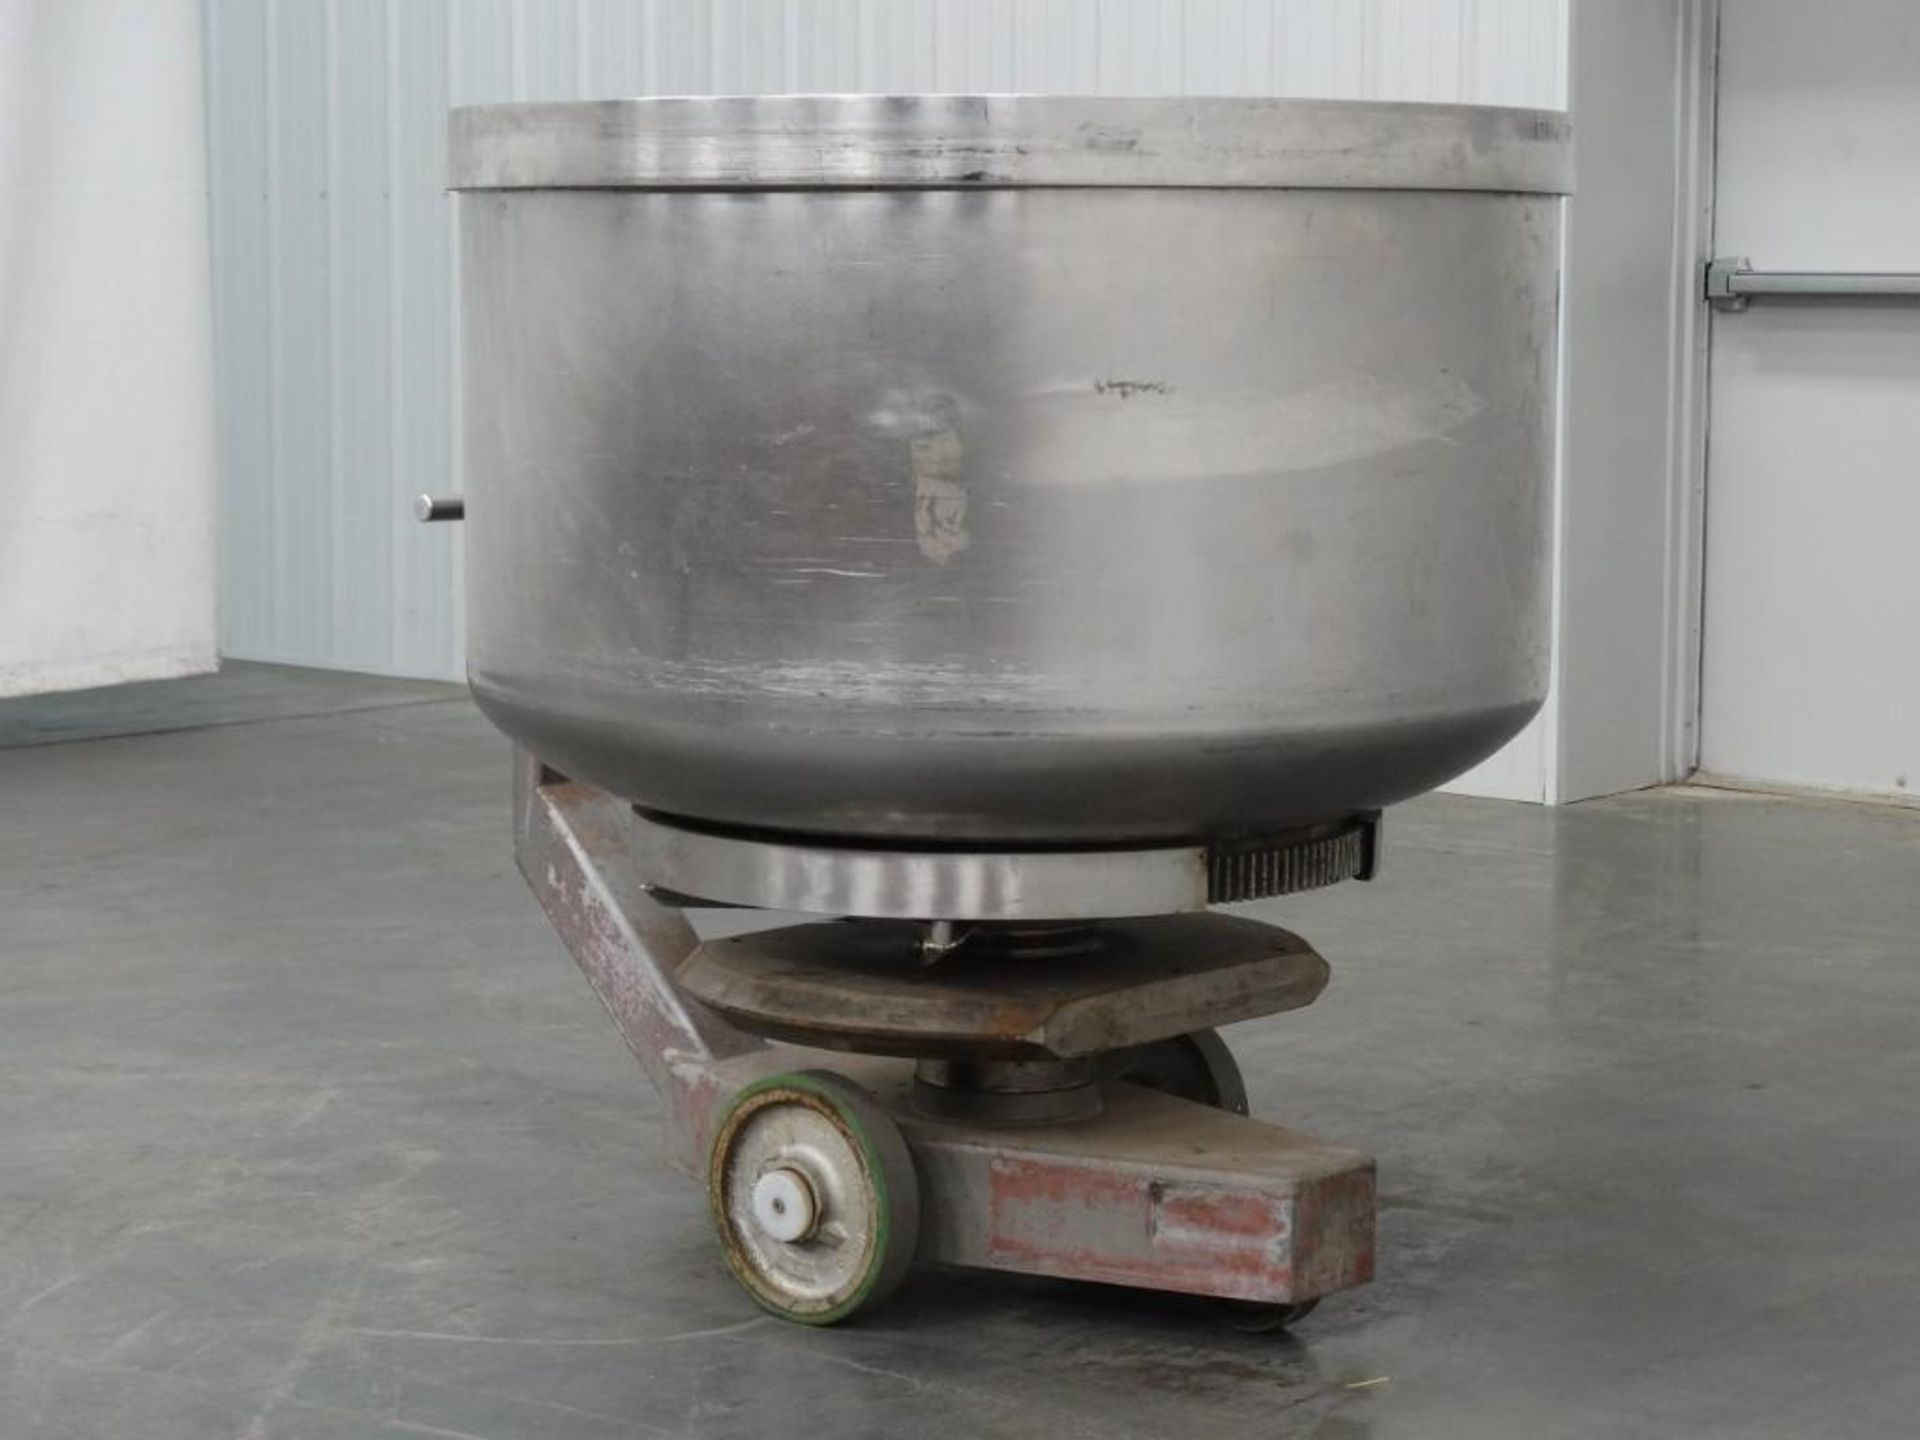 VMI 175 Gallon Rotating Stainless Steel Mixing Bowl and Dolly - Image 2 of 6